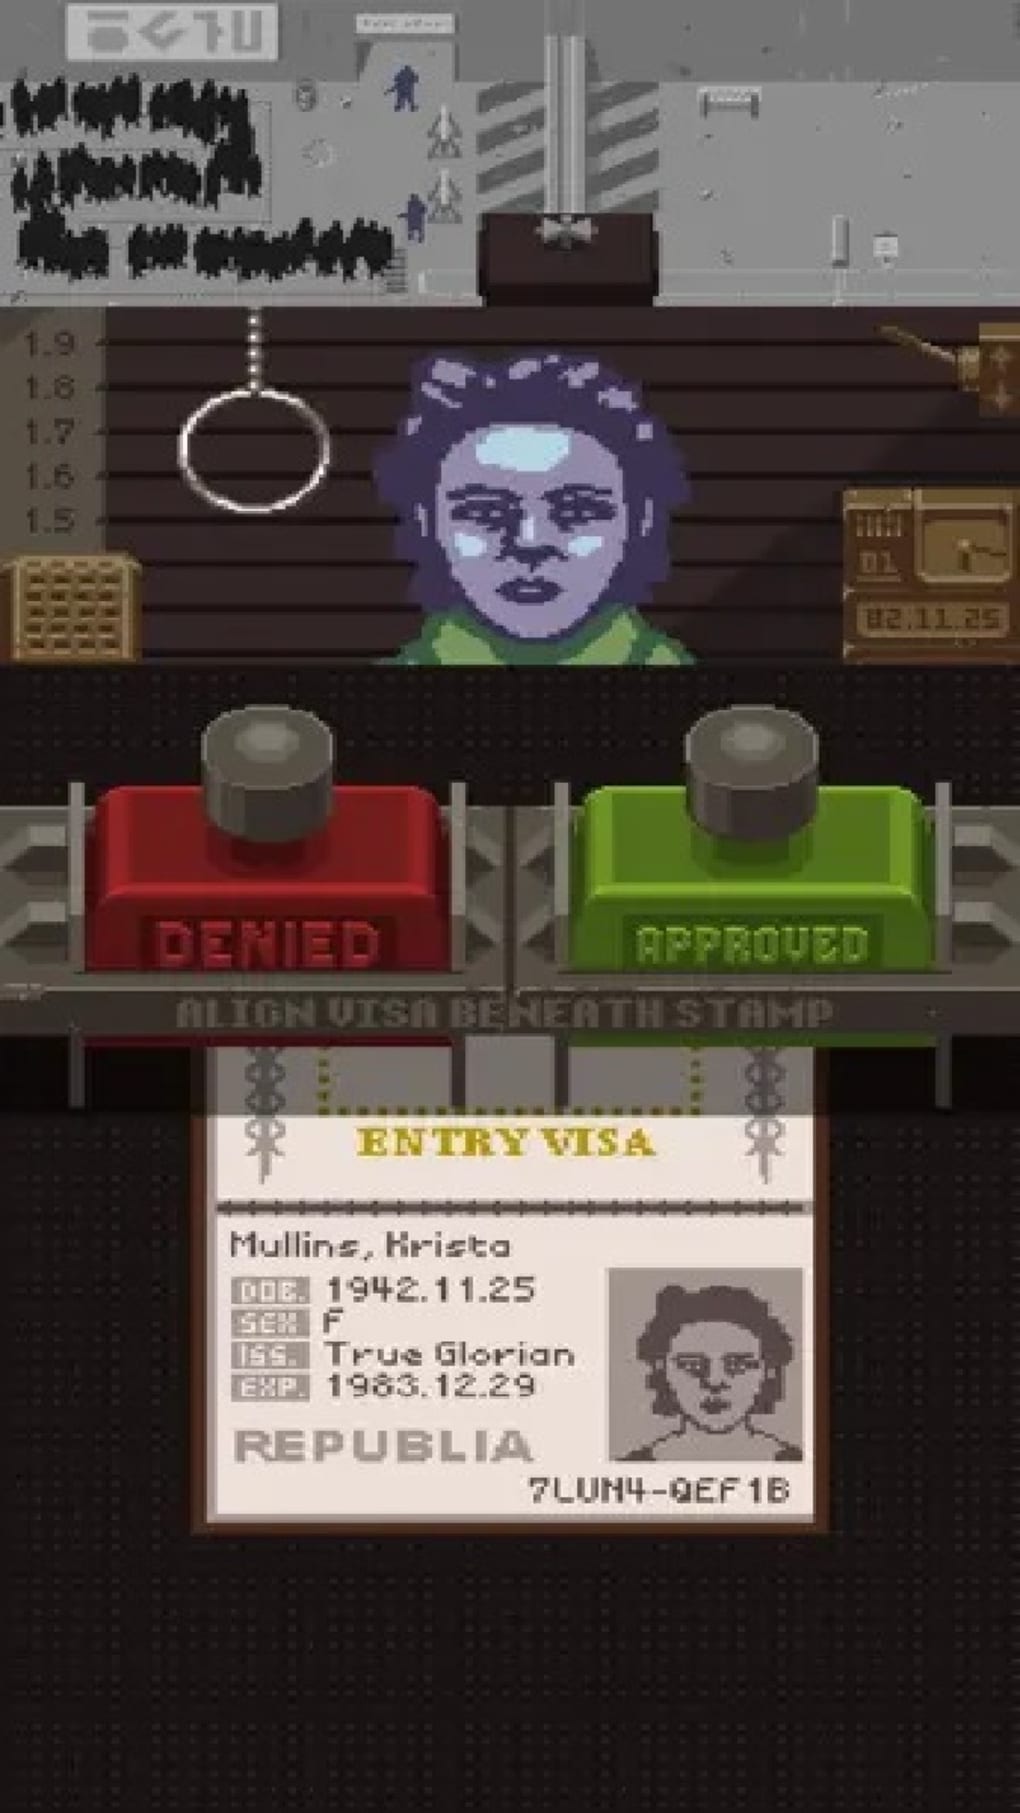 Papers, Please for iOS and Android set for August 5 release